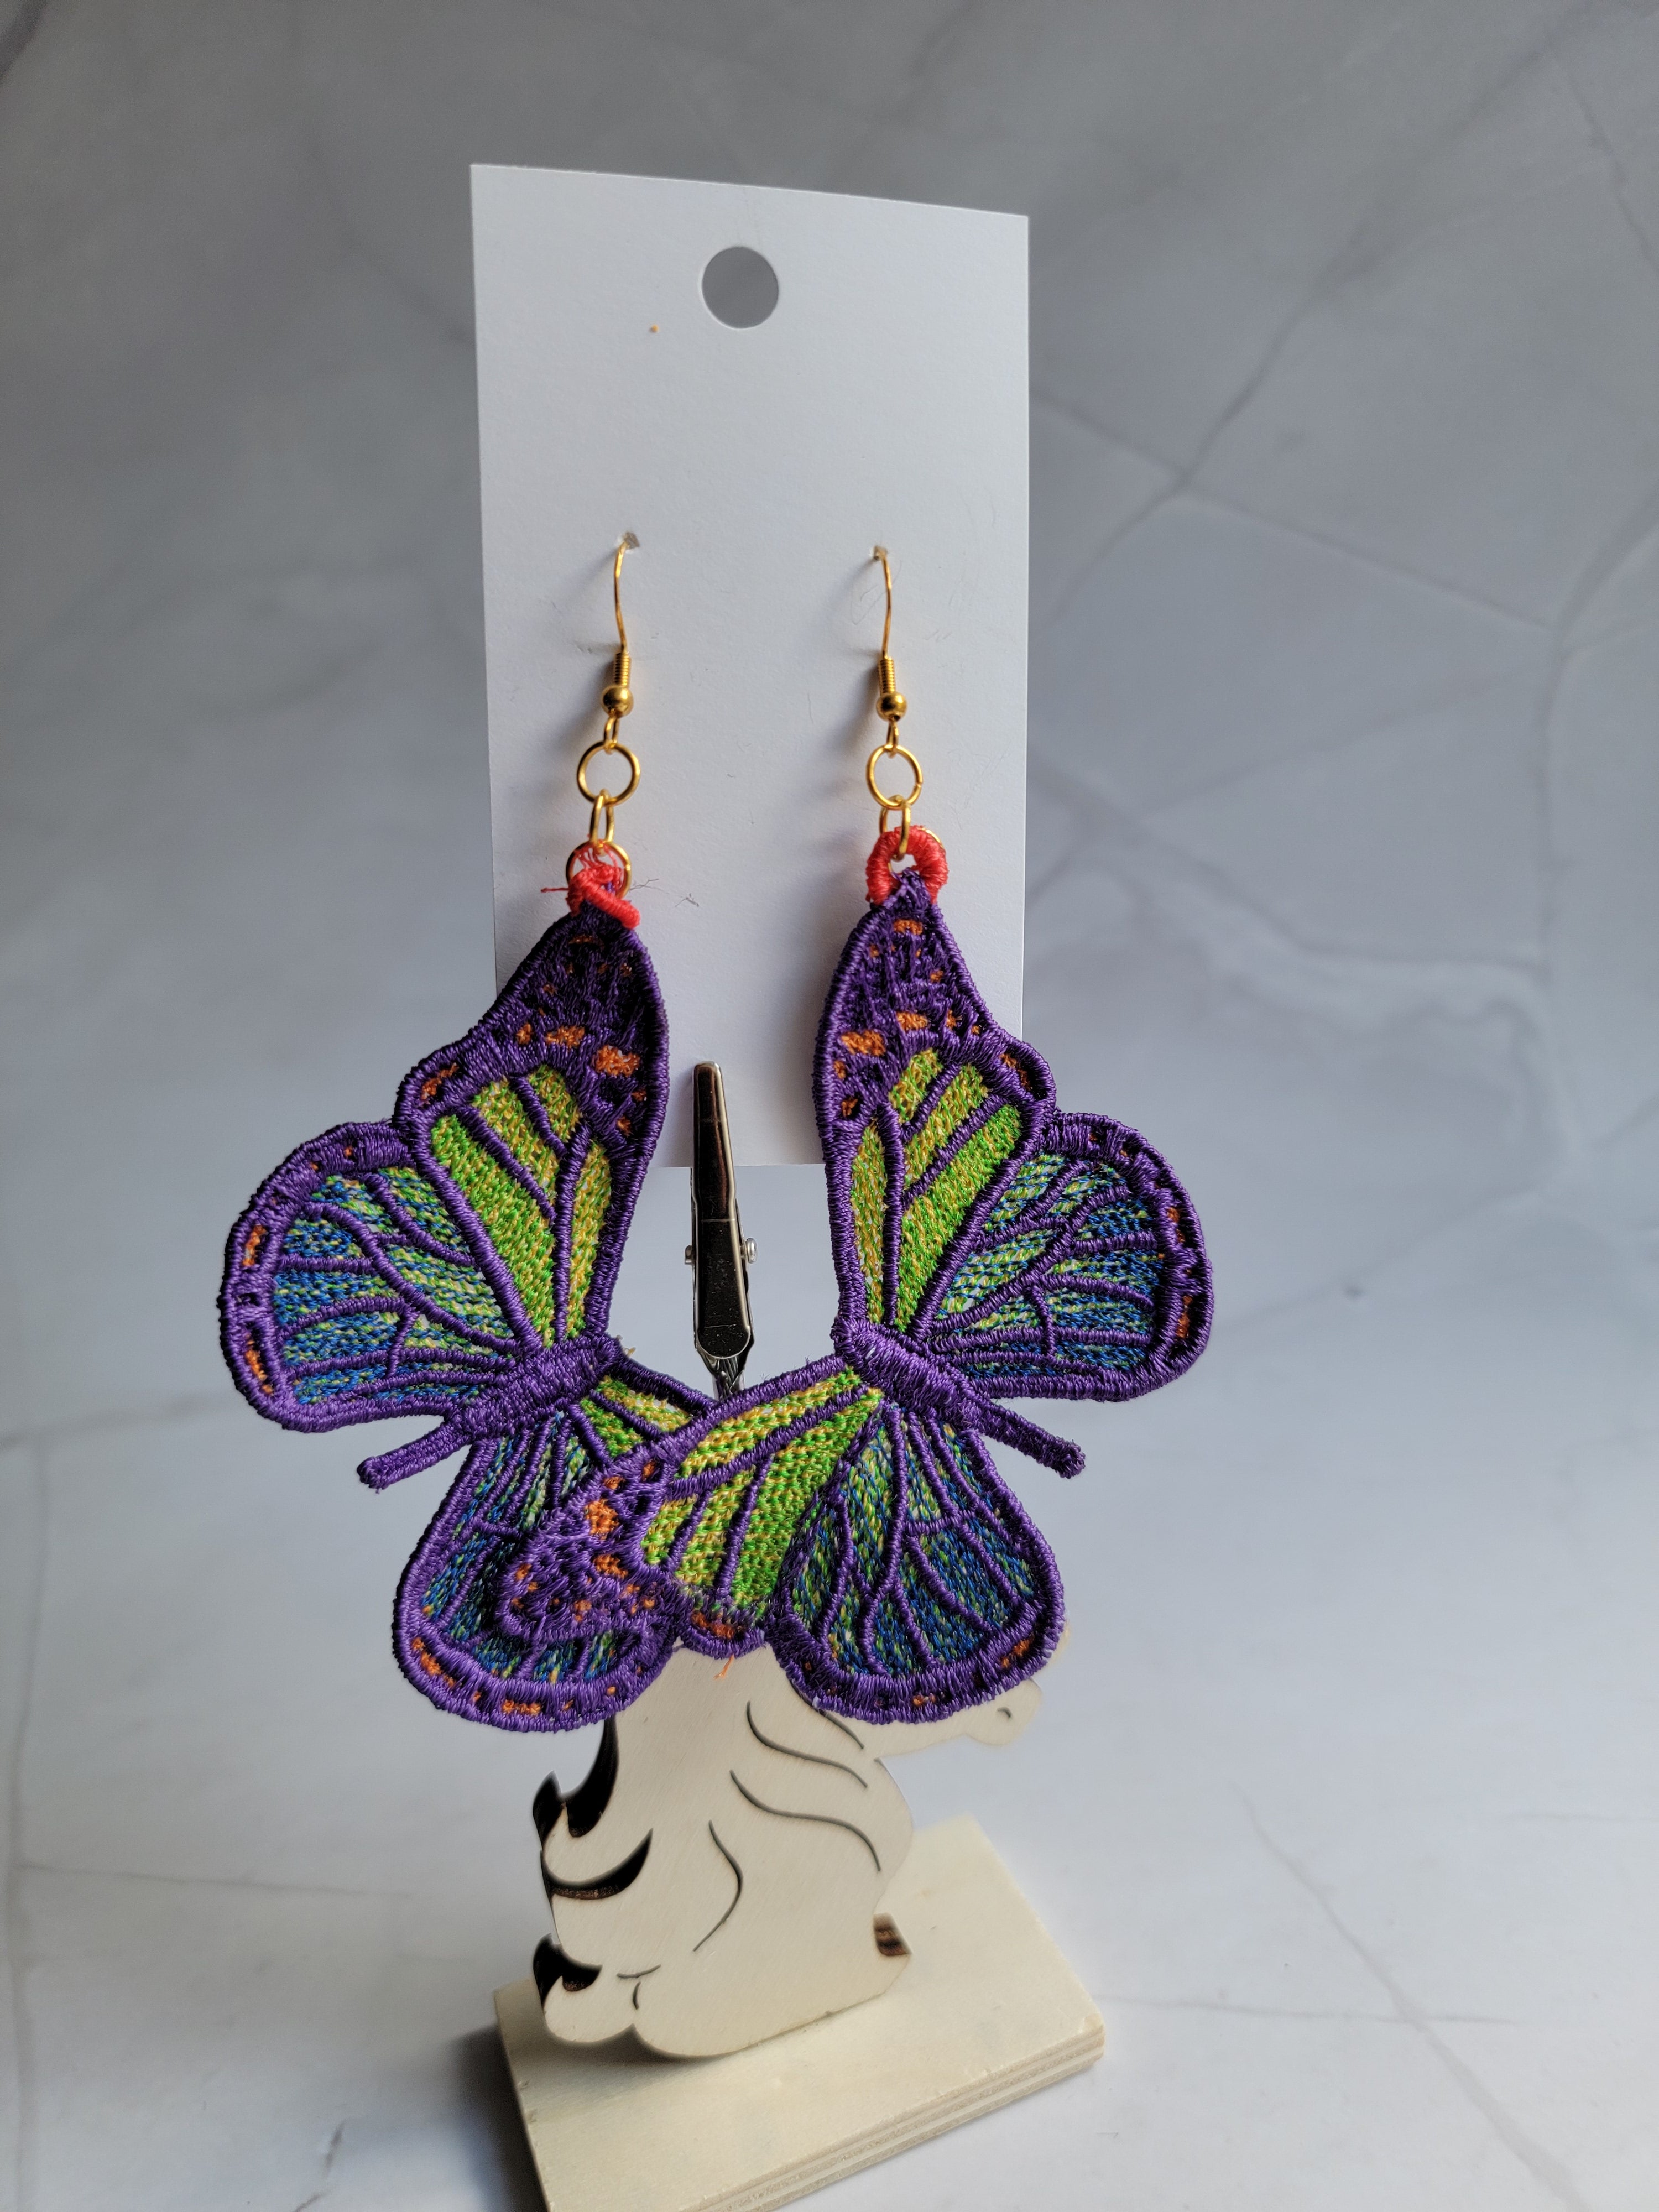 Buy Butterfly Earrings, Red Butterflies, Butterfly Gifts, Lightweight  Earrings, Gifts for Her, Good Luck Gift, Thinking of You, Everyday Earring  Online in India - Etsy